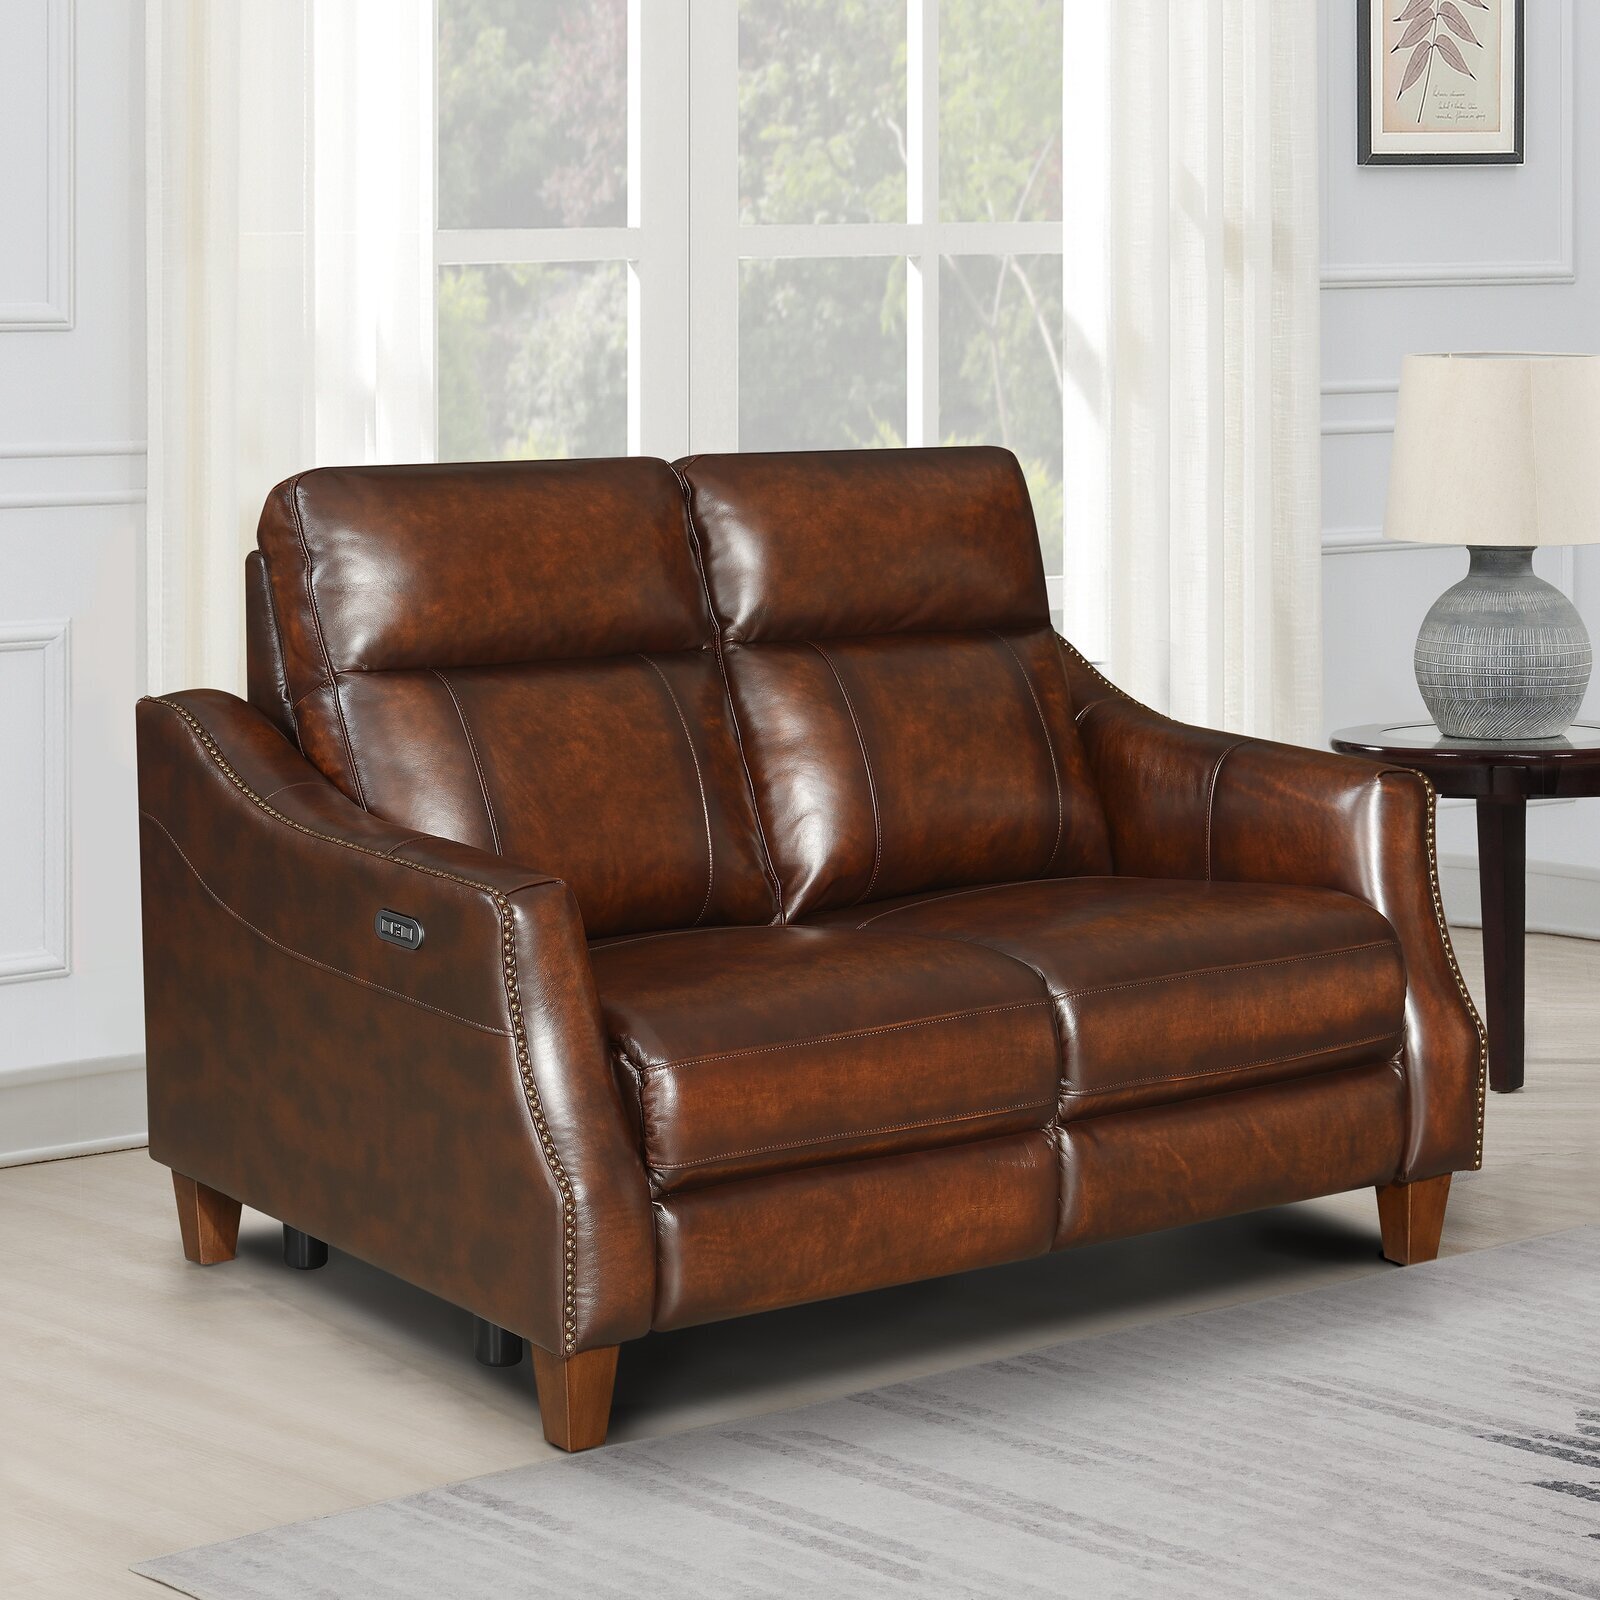 Recessed Arm Double Recliner